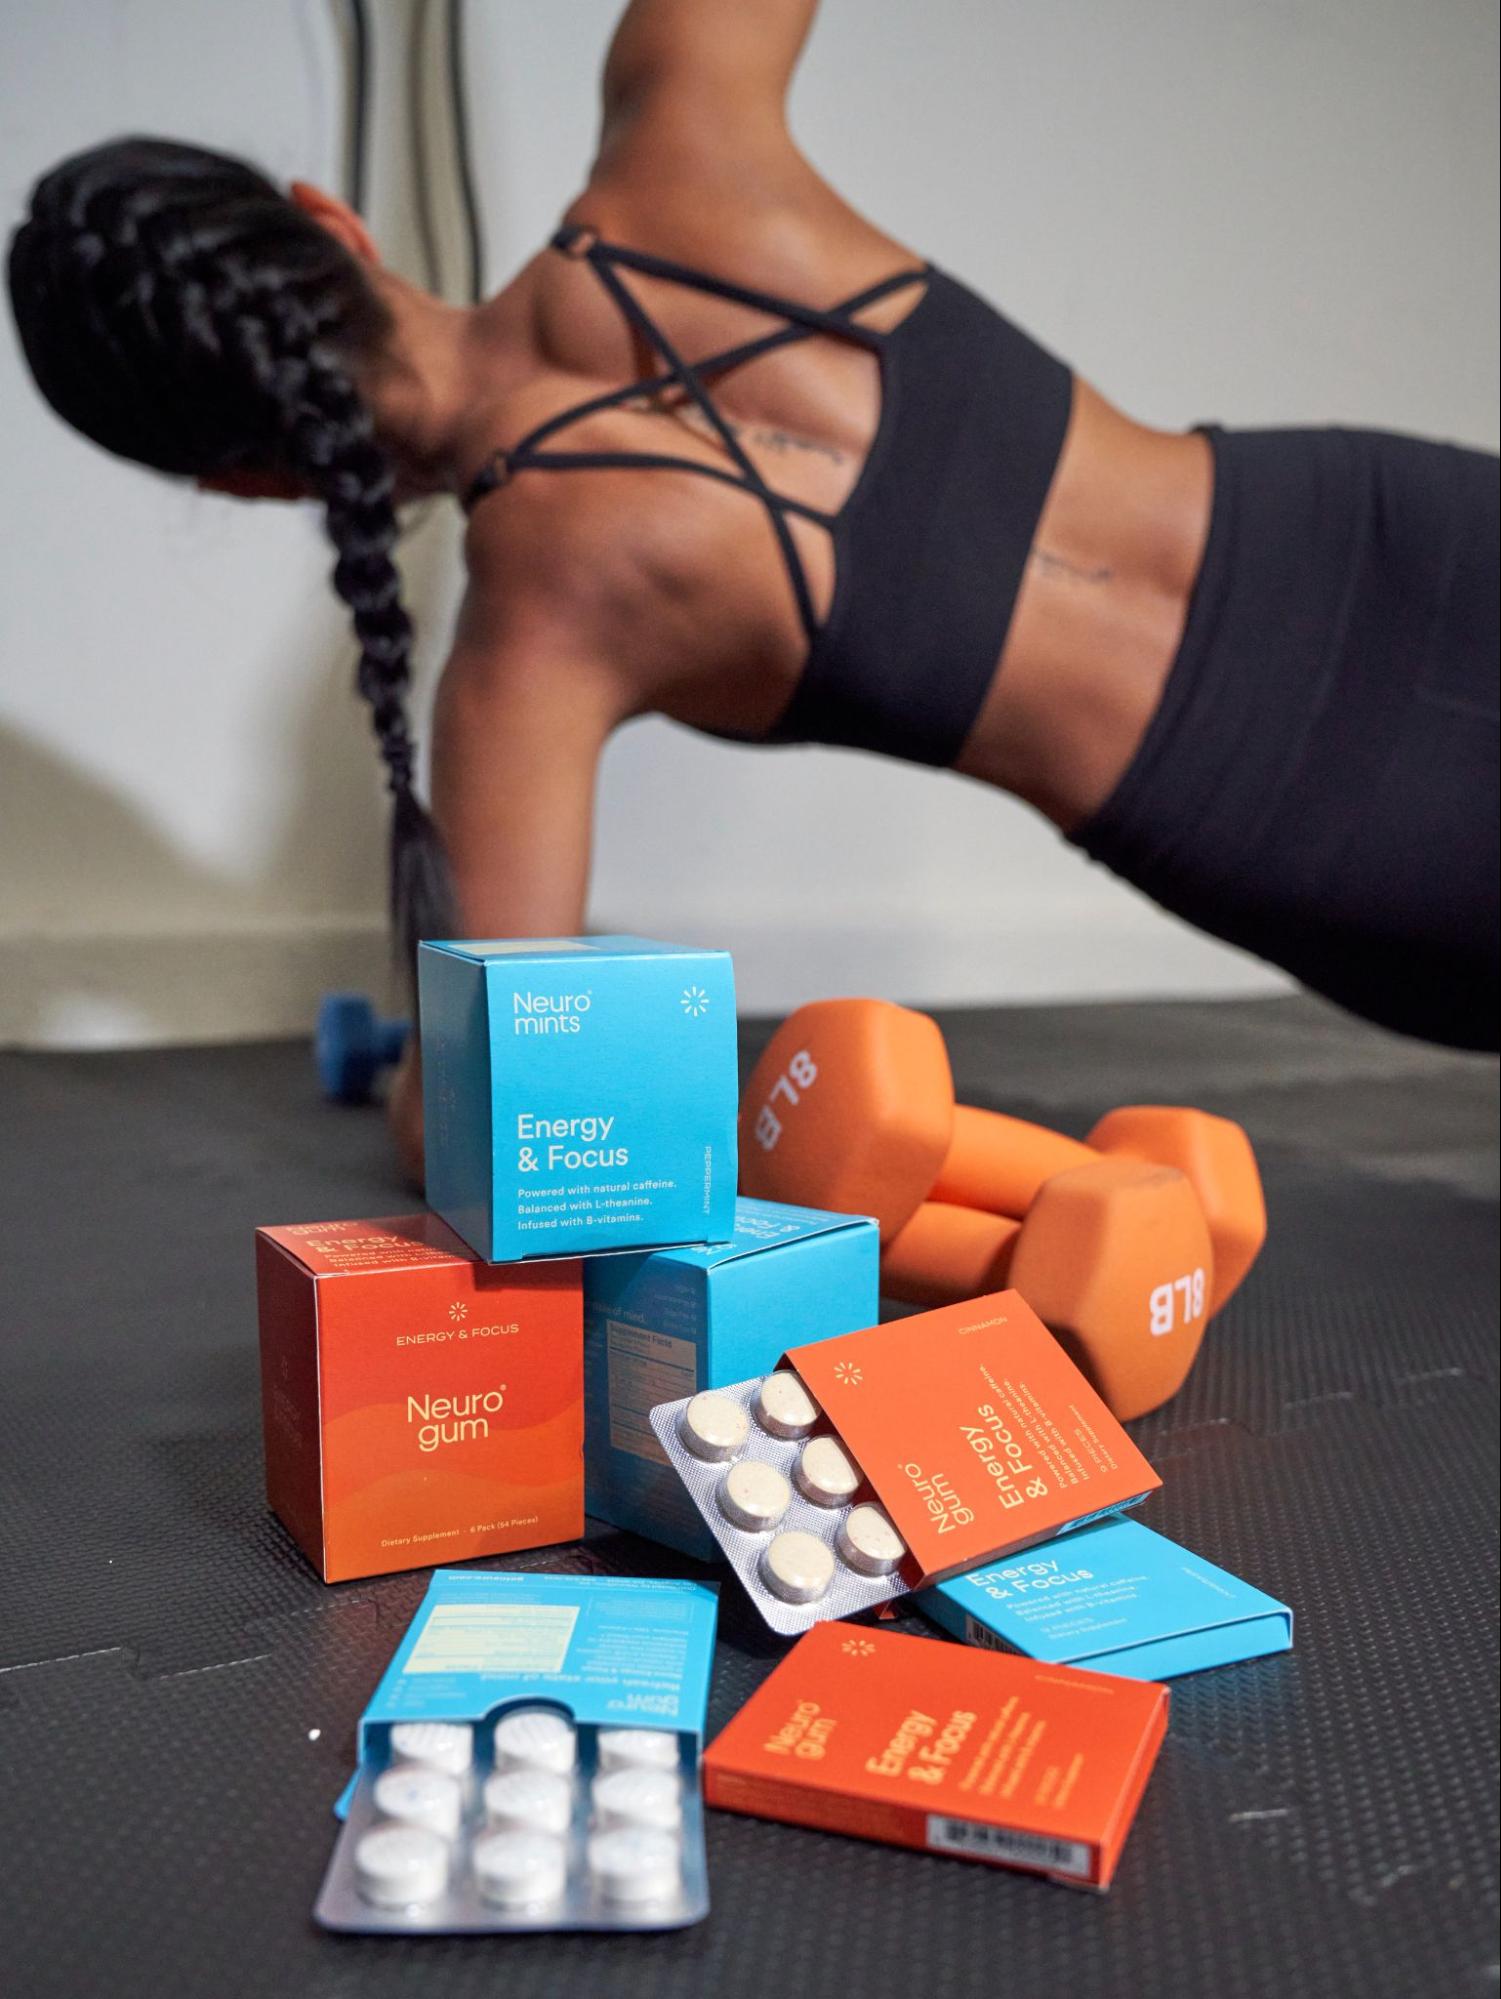 A model working out in the background with Neuro products in the foreground. 